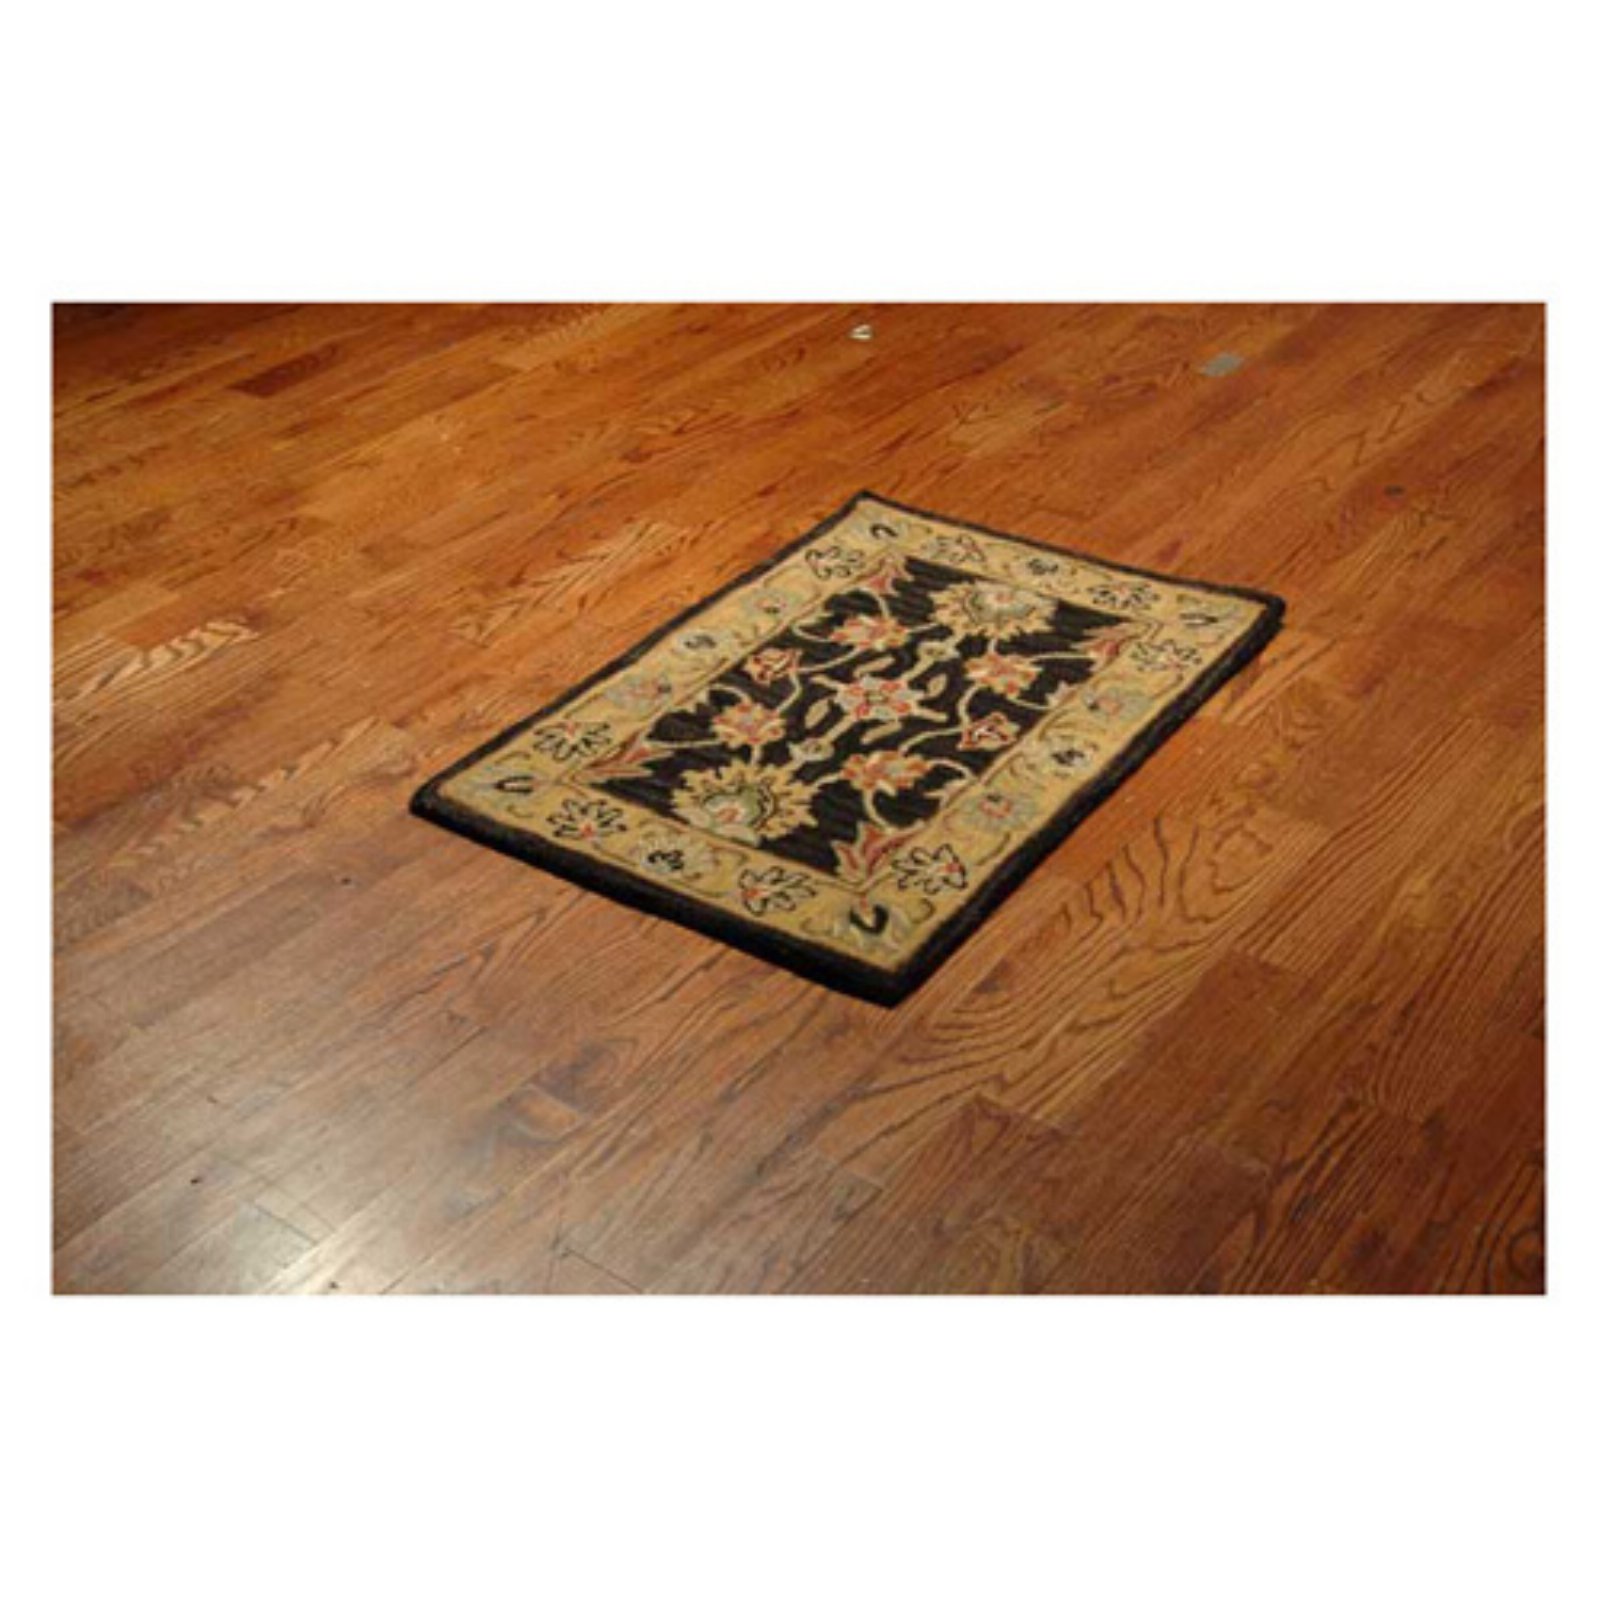 SAFAVIEH Heritage Regis Traditional Wool Area Rug, Charcoal/Gold, 3' x 5' - image 3 of 10